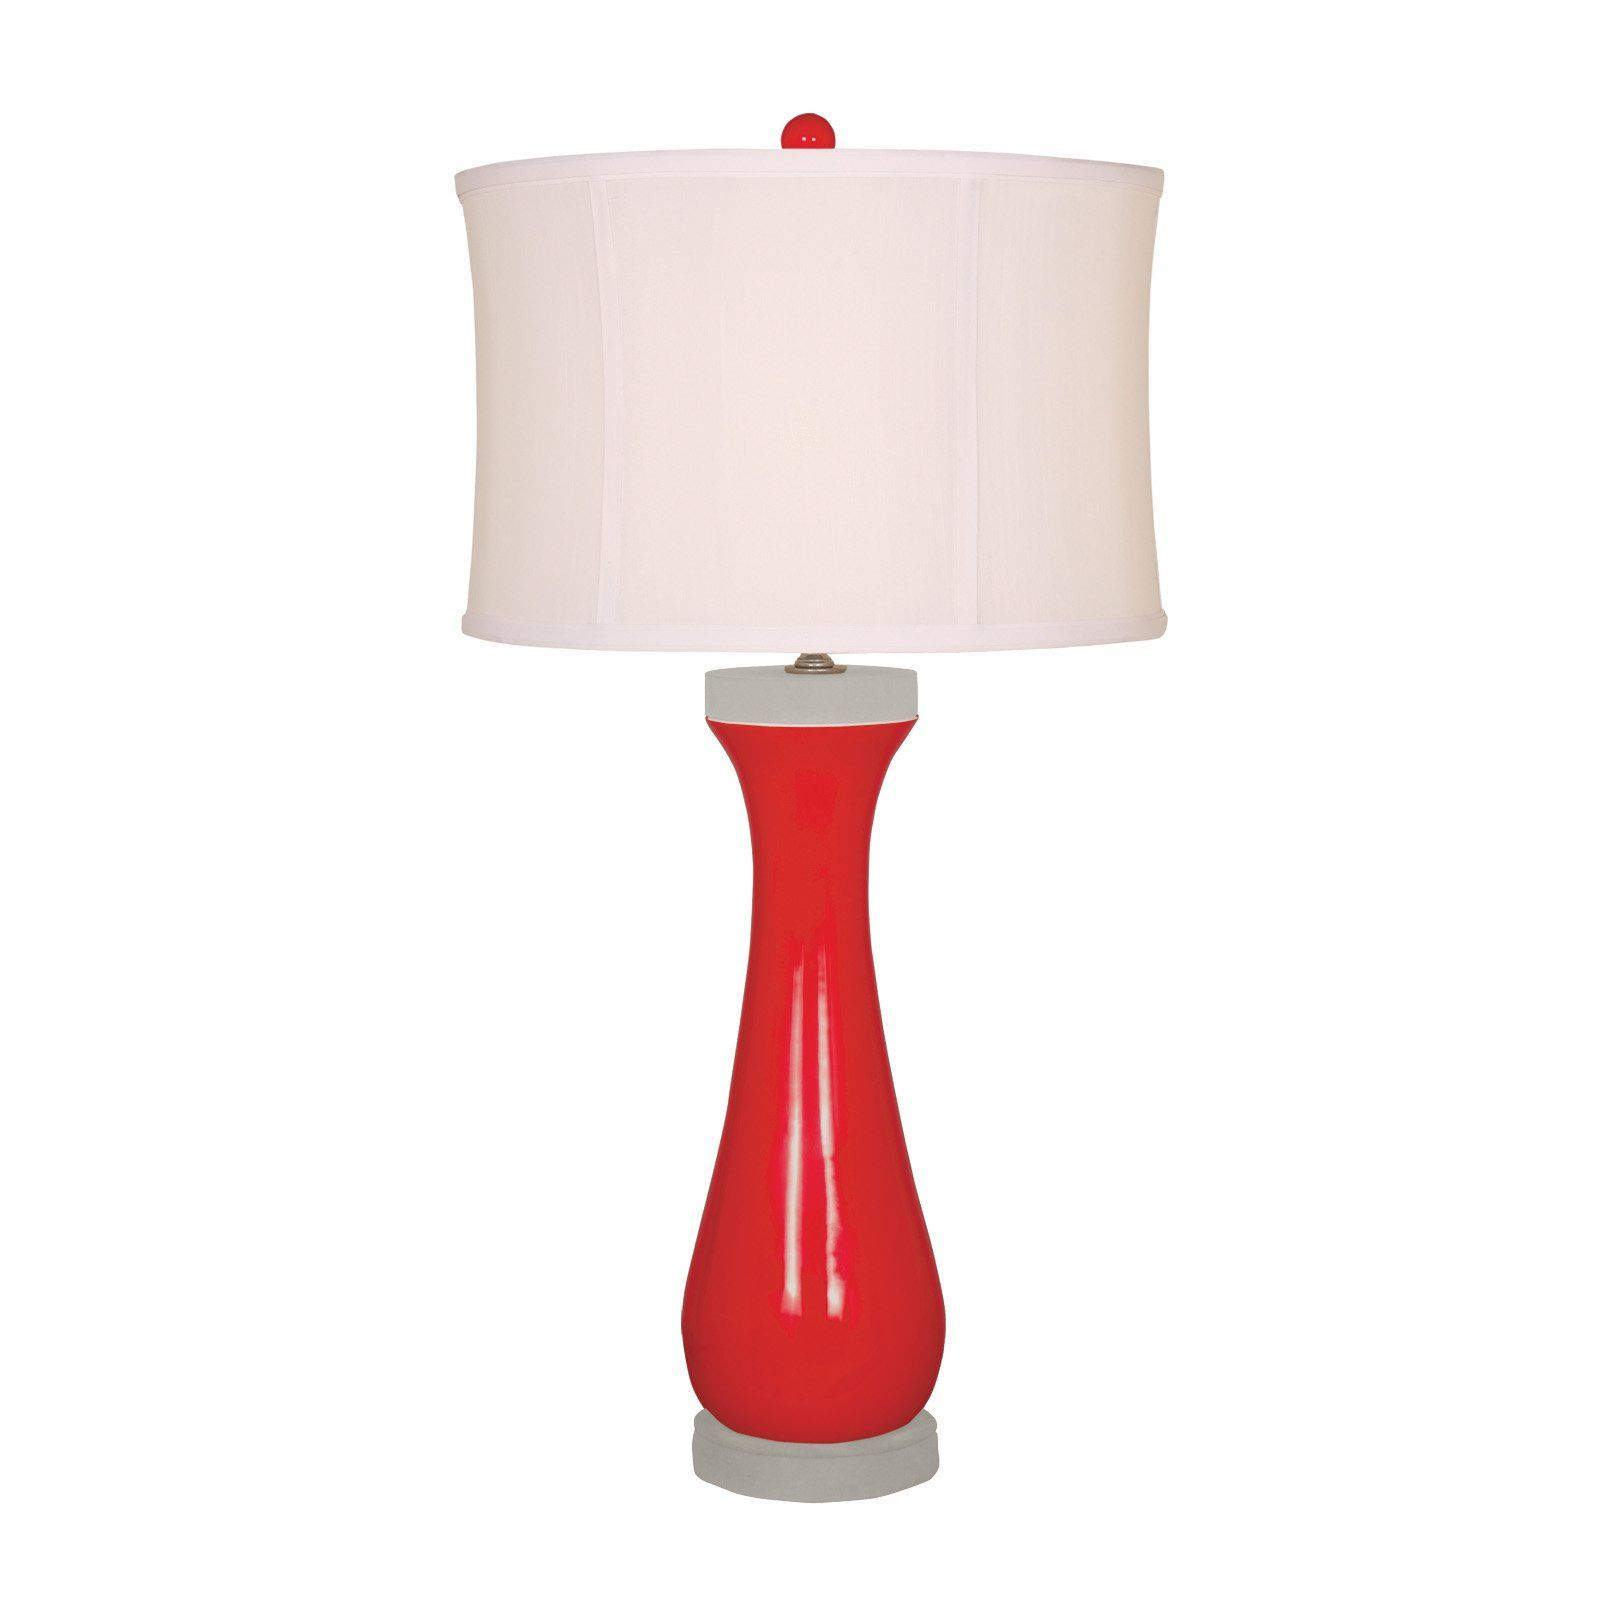 Passport Splash Thin Ceramic Table Lamp Red 09t147rd intended for proportions 1600 X 1600